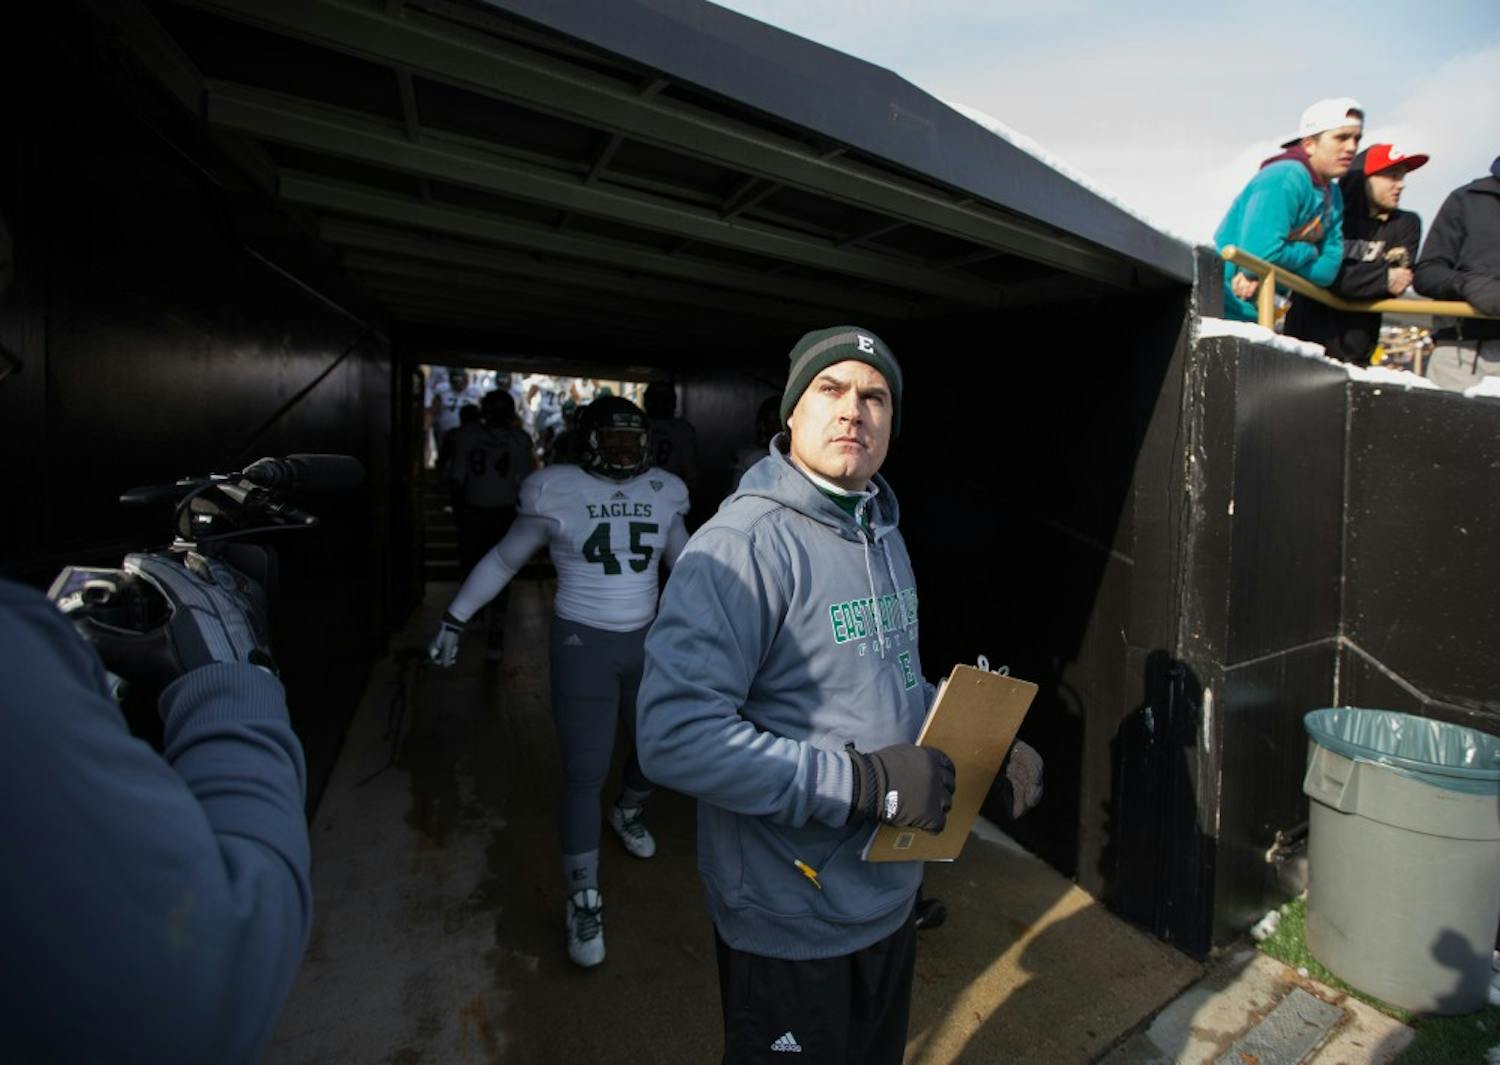 Eastern Michigan coach Chris Creighton prepares to lead his team onto the field in the Eagles 51-7 loss to Western Michigan Saturday afternoon in Kalamazoo.